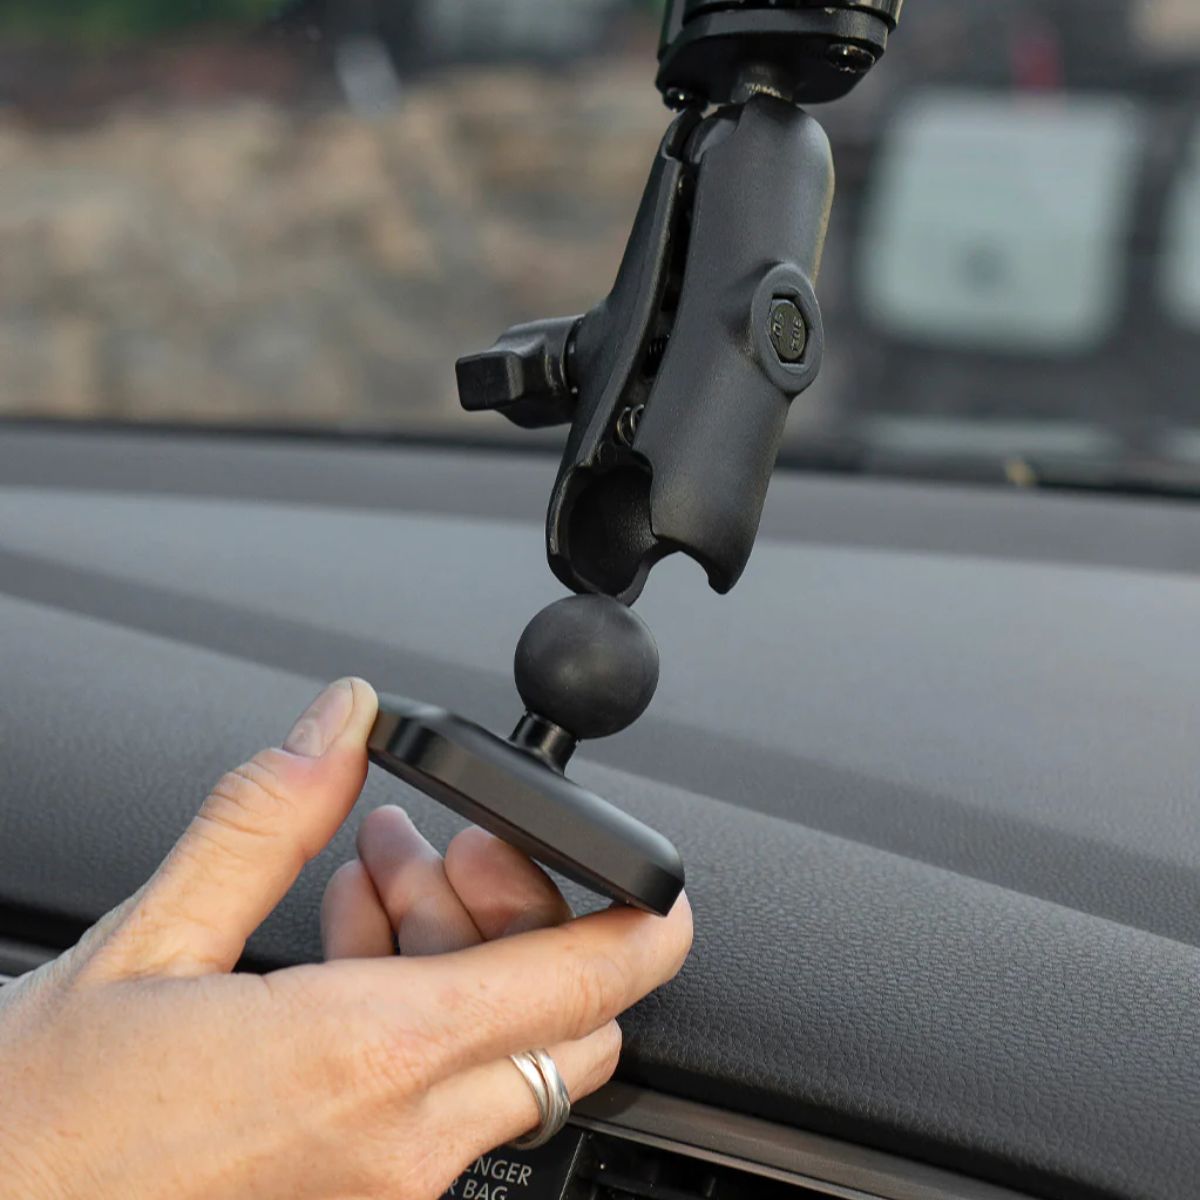 1 inch Ball Mount Adapter for Car - Charging Model 8